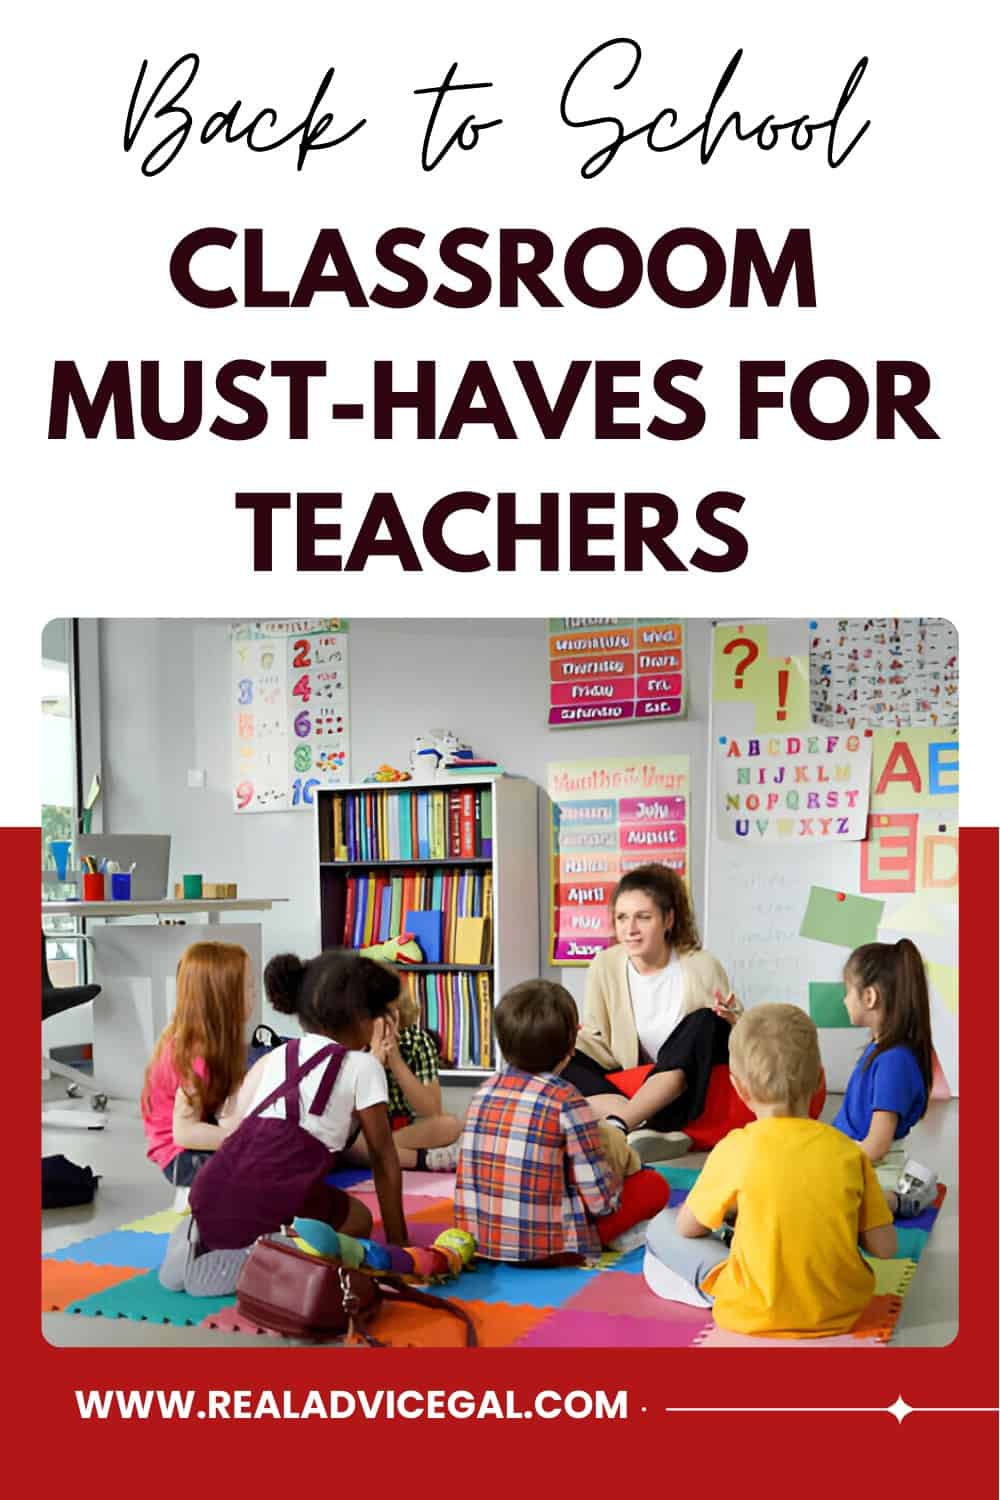 My Back to School Wishlist: Classroom Must-Haves for Teachers